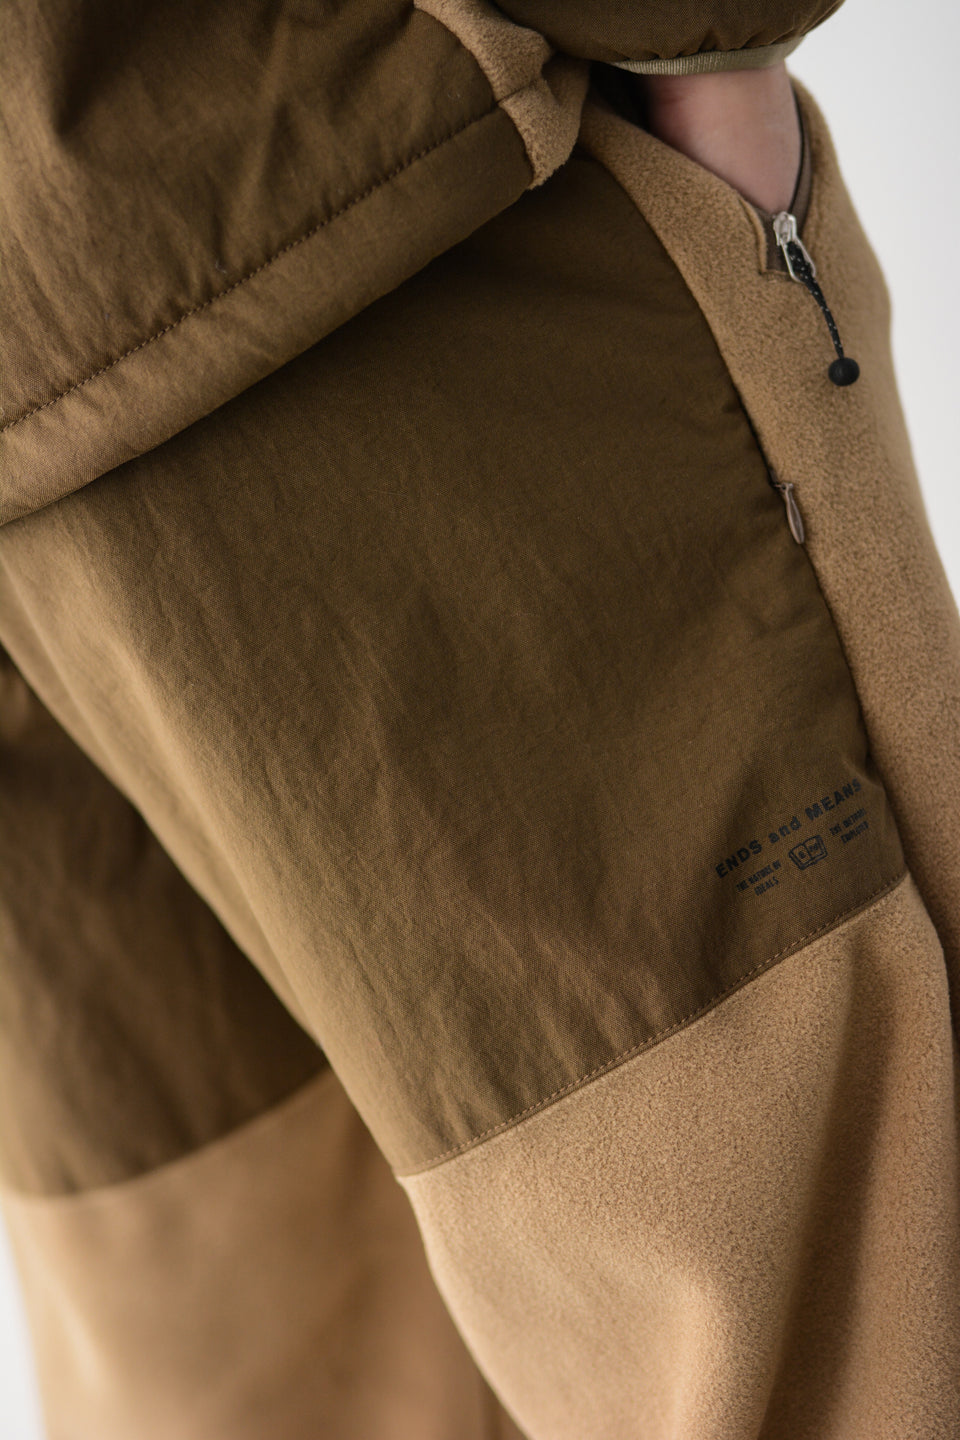 ENDS and MEANS Japan AW21 FW21 Tactical Fleece Trousers Brown Beige Calculus Victoria BC Canada